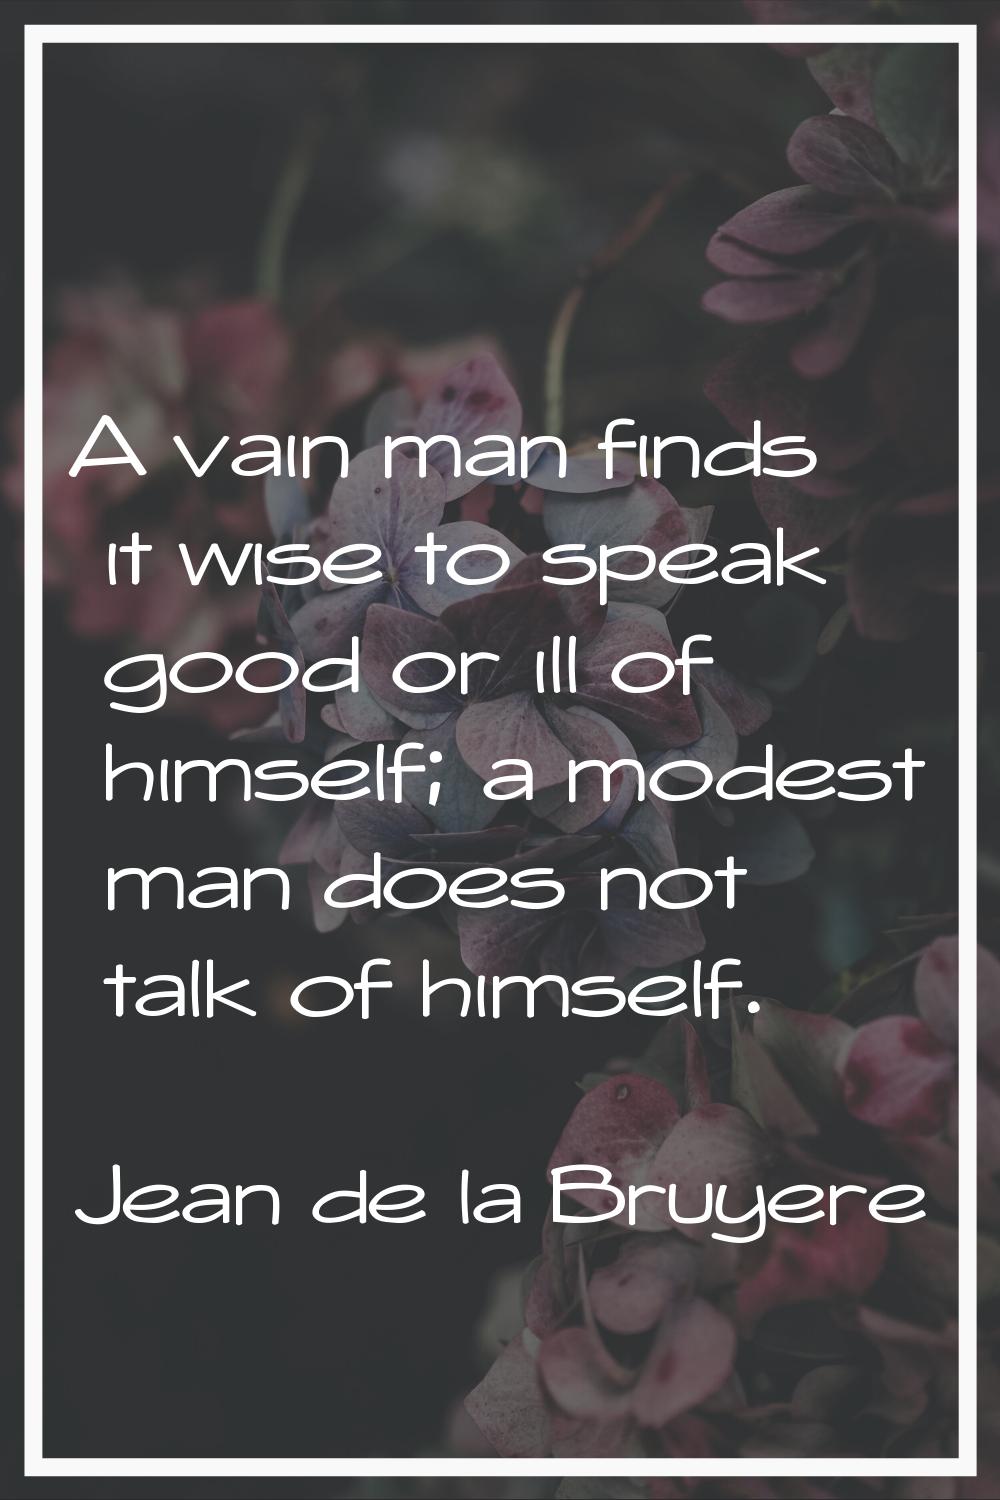 A vain man finds it wise to speak good or ill of himself; a modest man does not talk of himself.